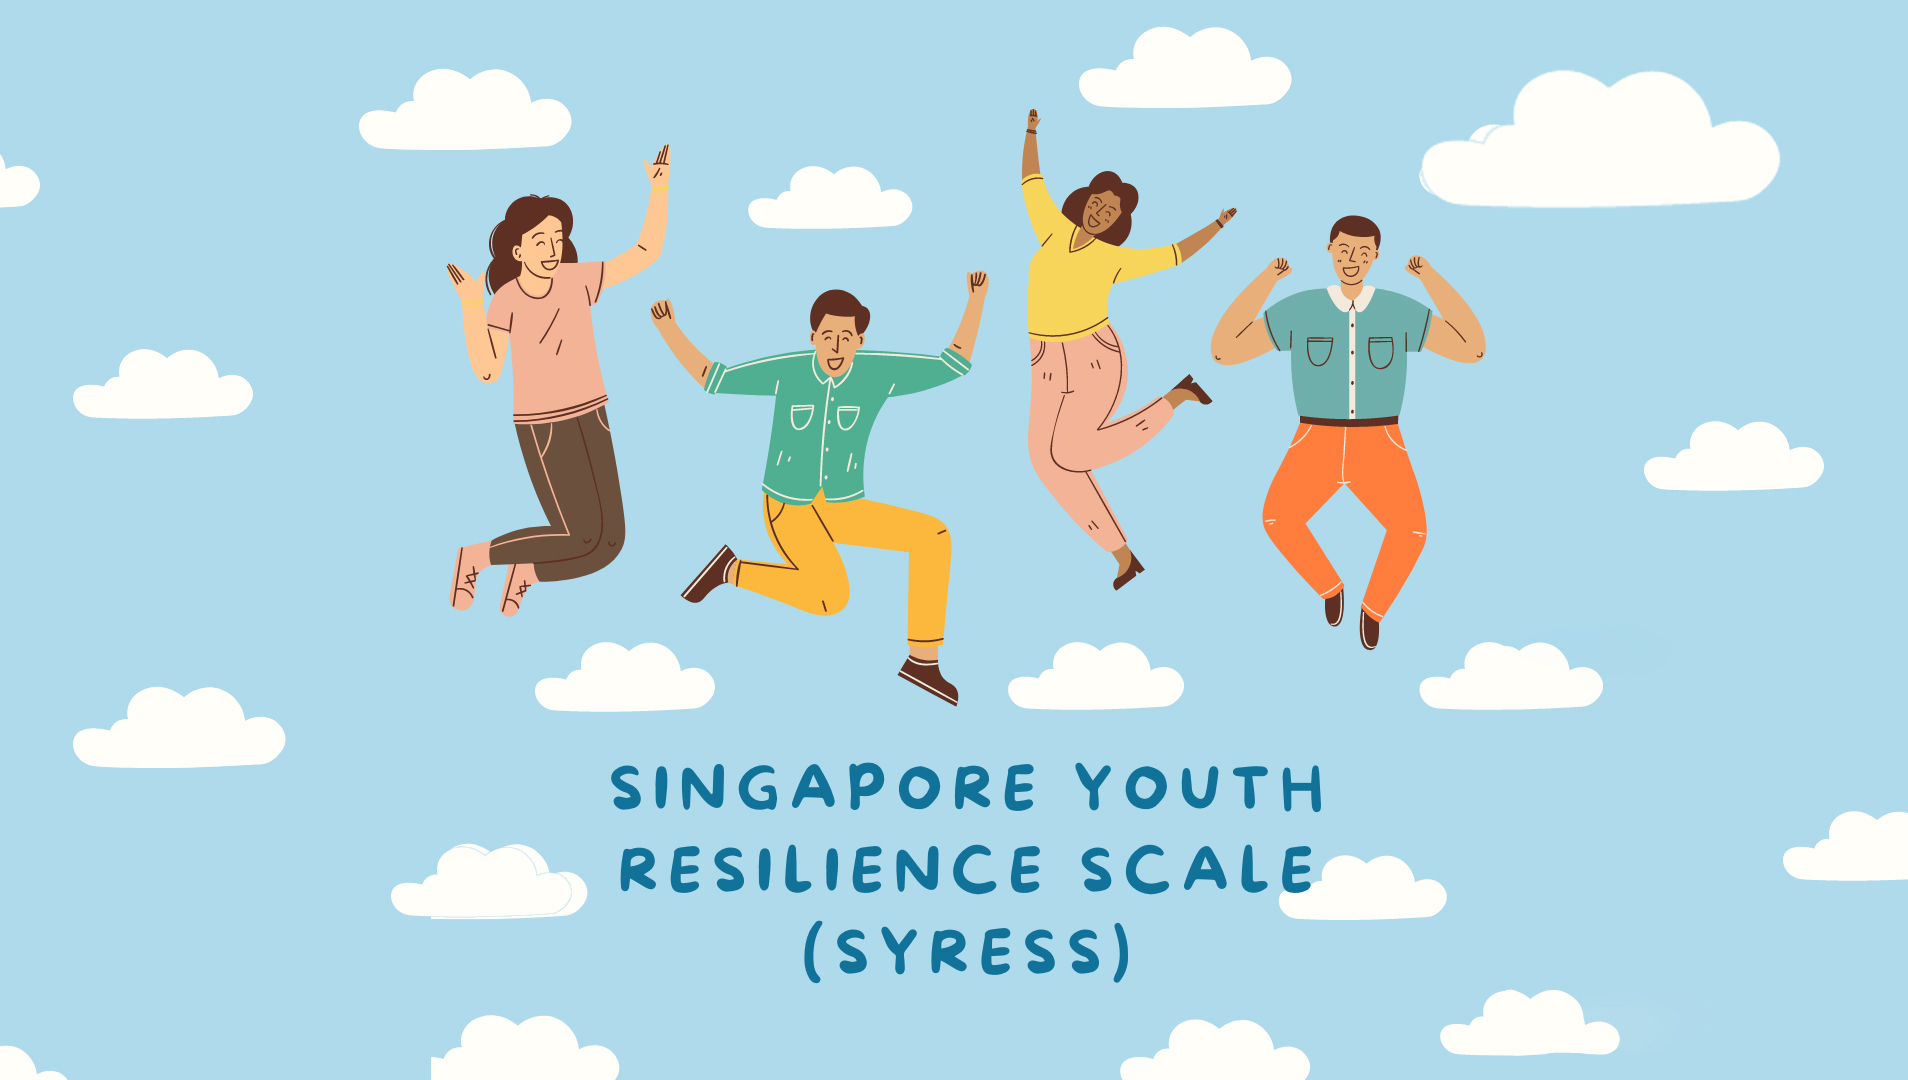 Singapore Youth Resilience Scale (SYRESS)